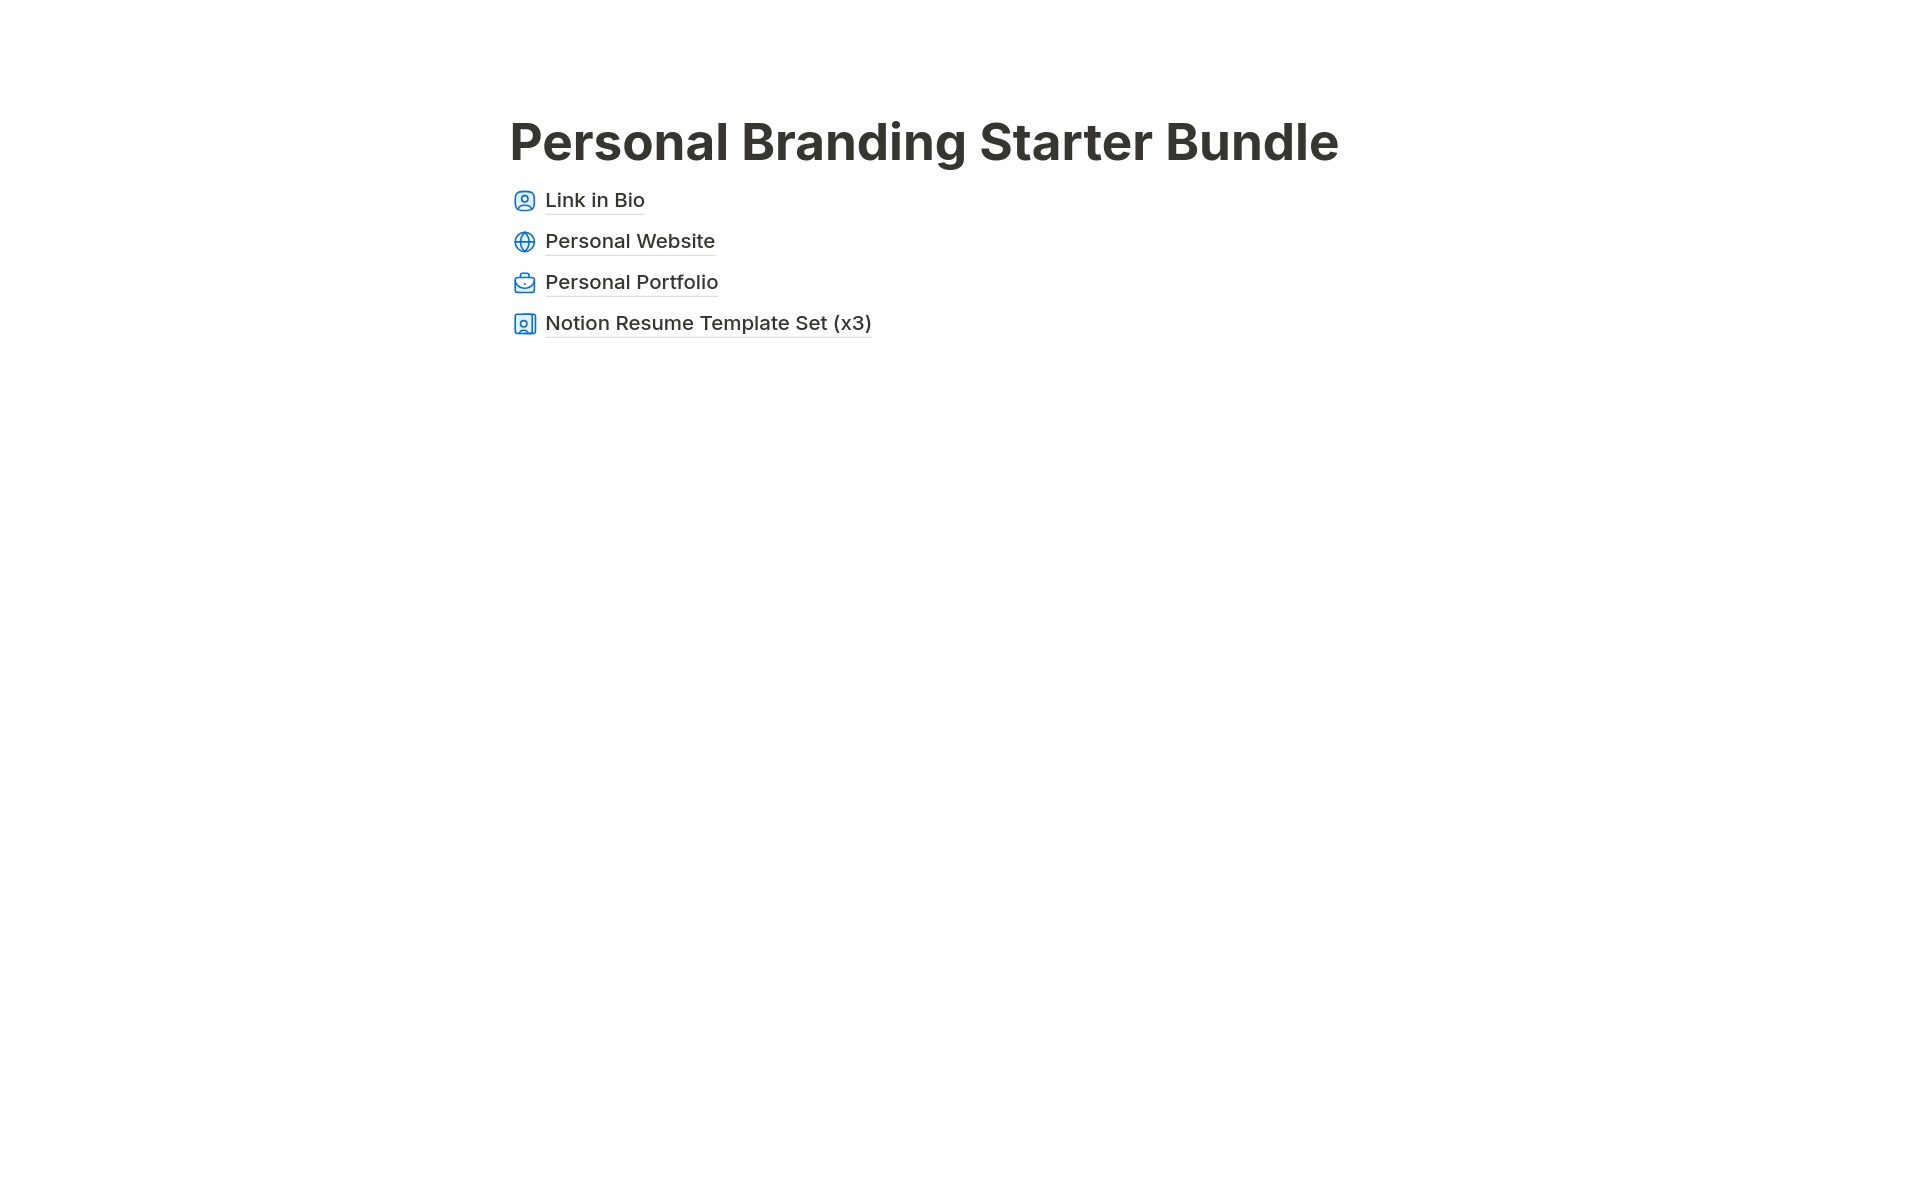 Elevate your personal brand without spending a dime.